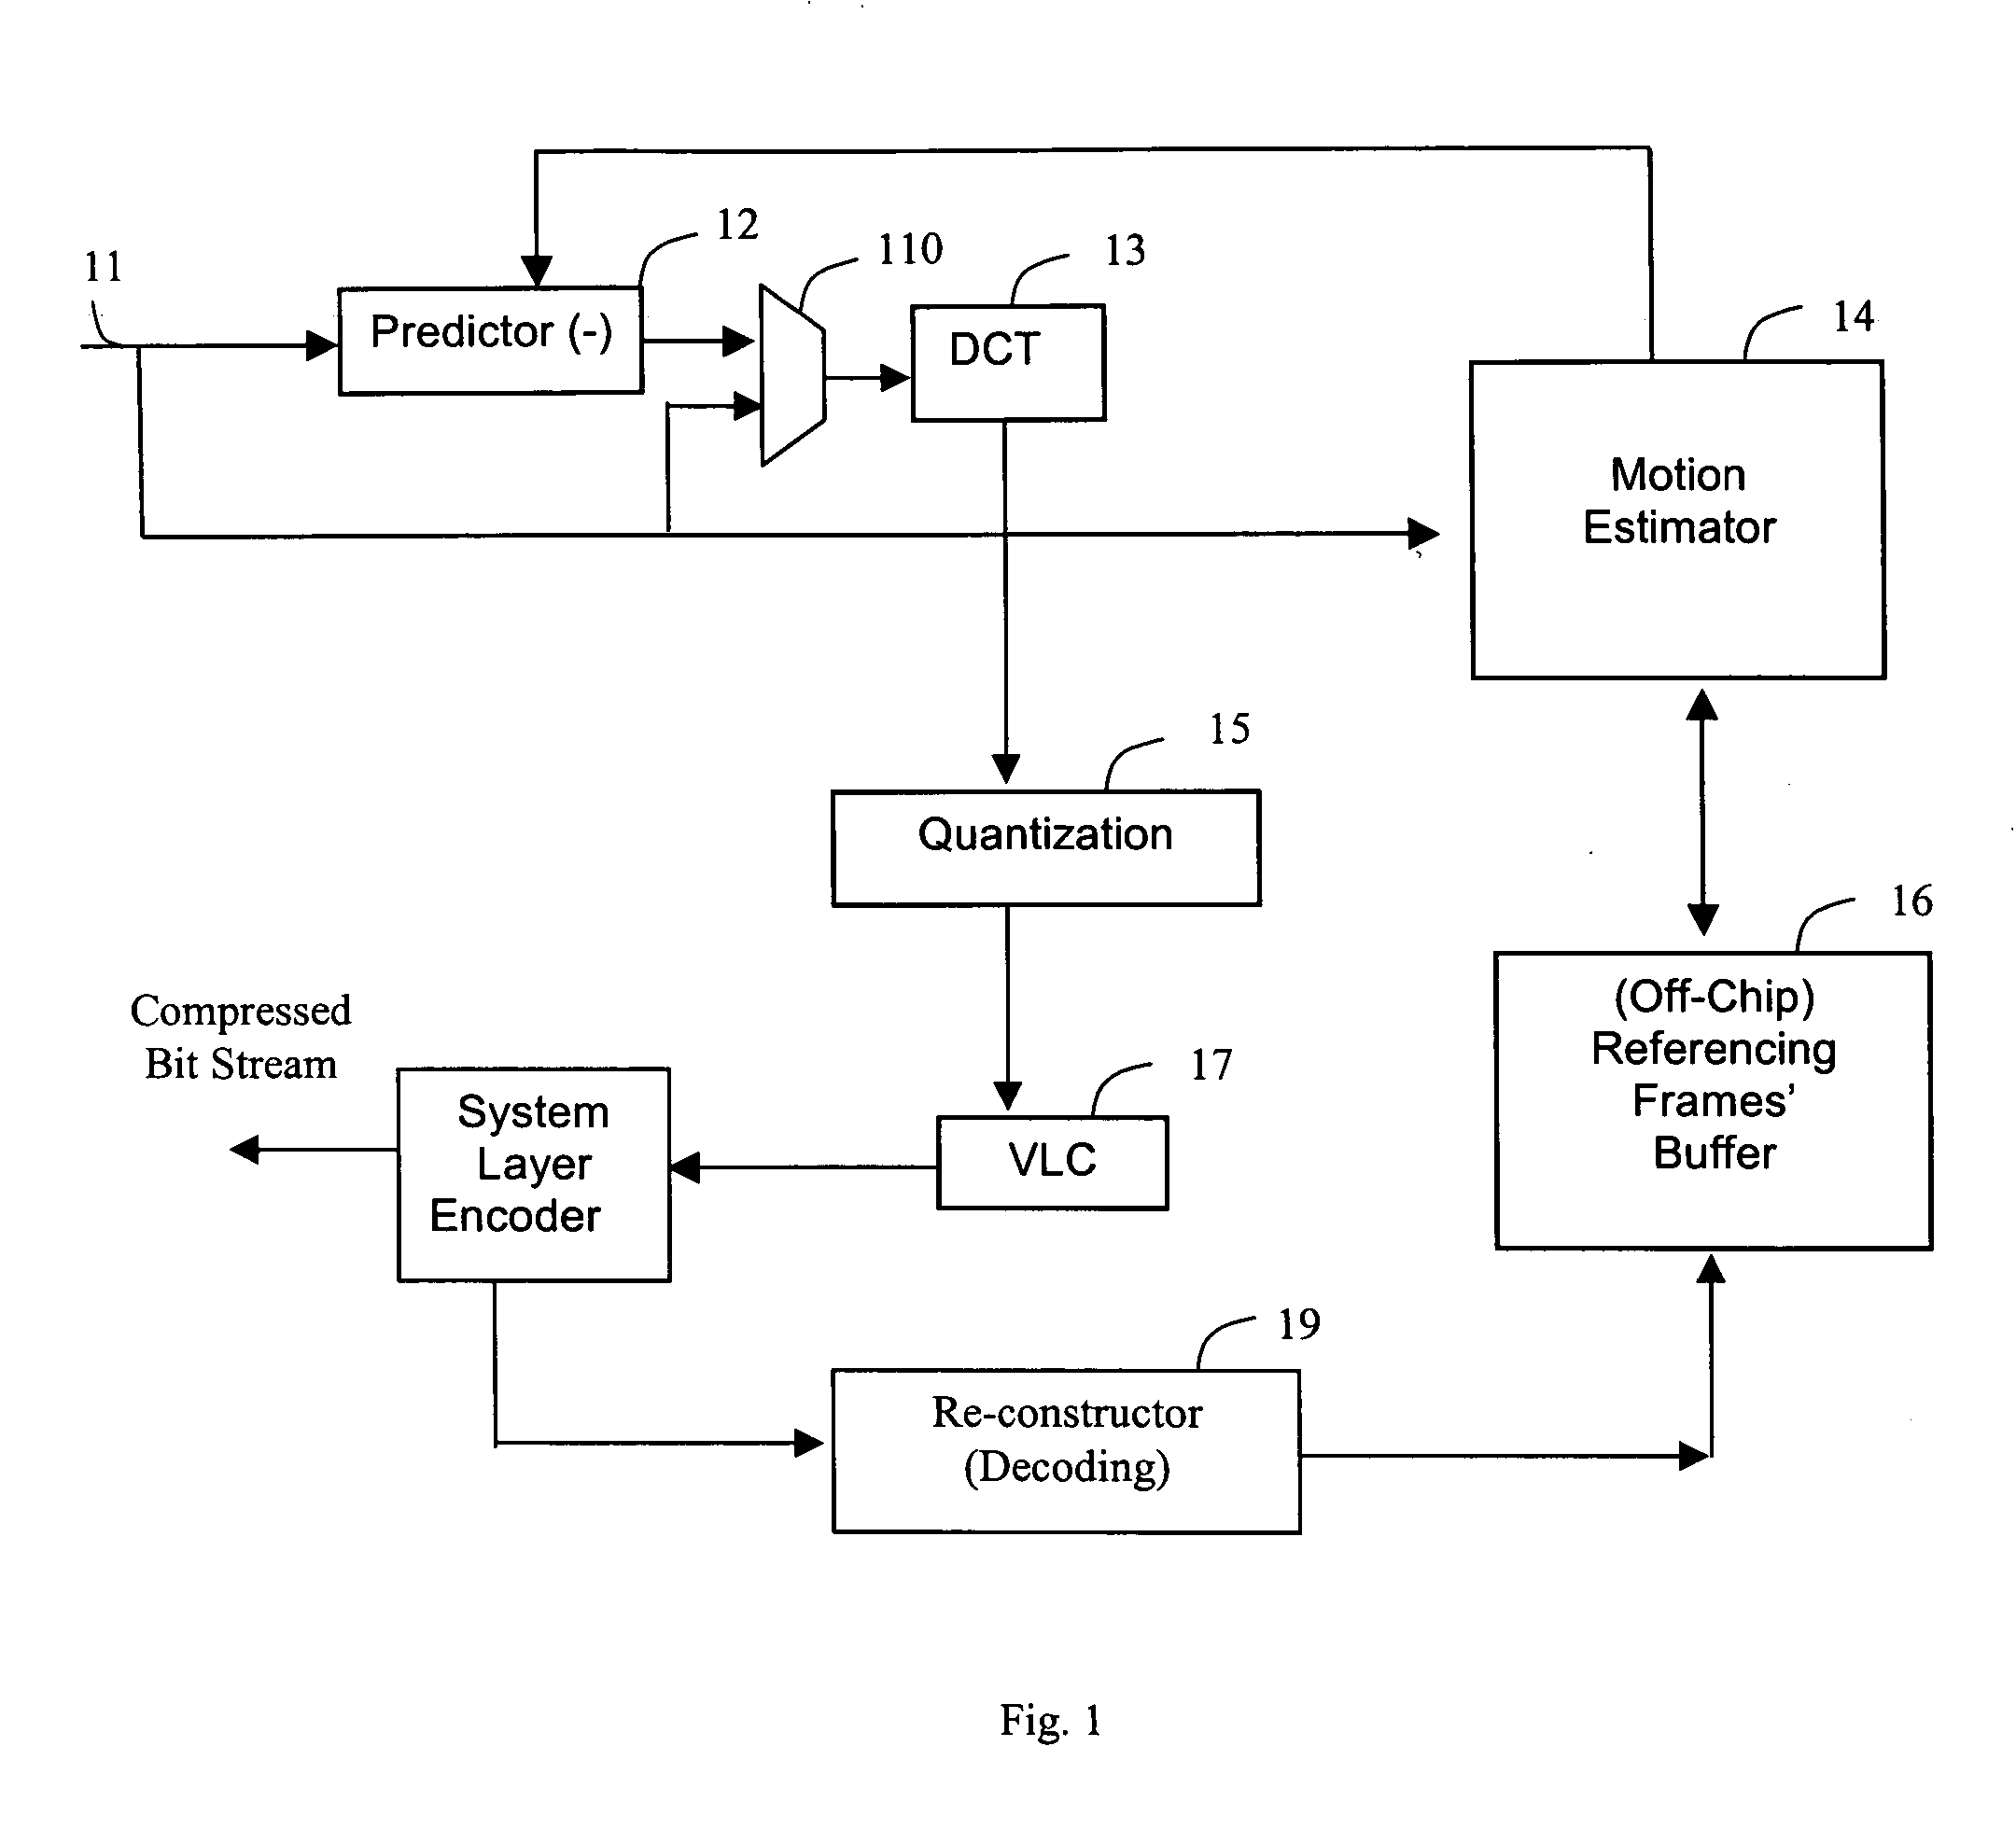 On-chip image buffer compression method and apparatus for digital image compression